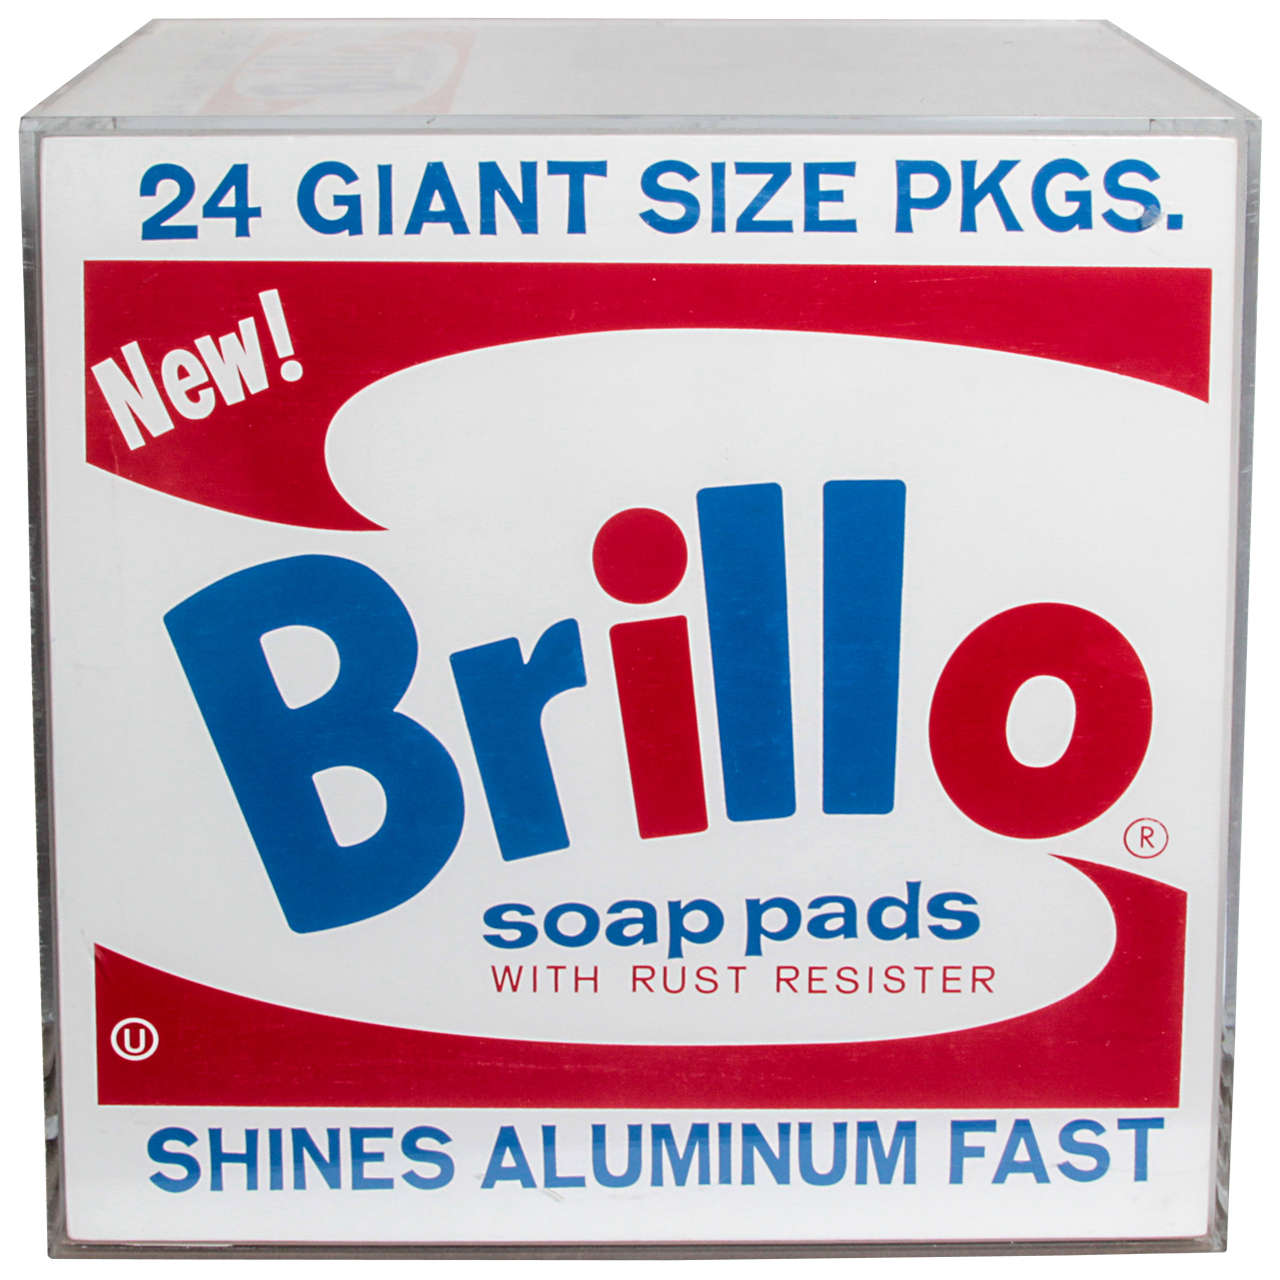 Painted Plywood Brillo Box in the Manner of Andy Warhol